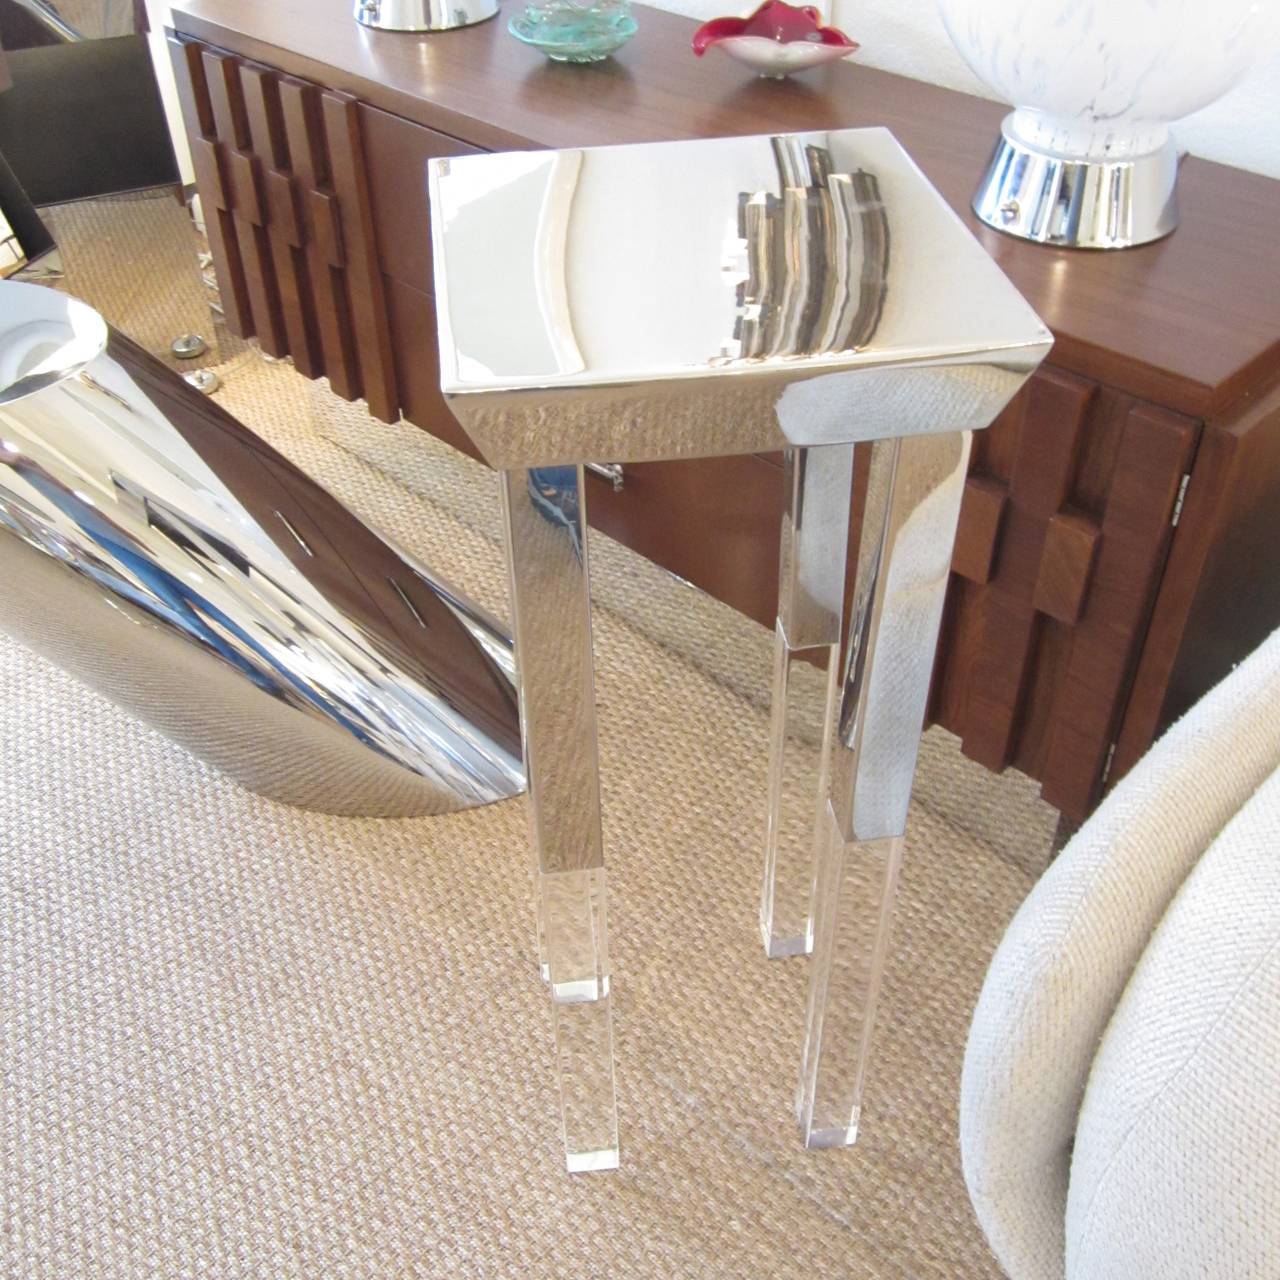 Gorgeous polished steel-top and partial leg side table with the balance of the legs in extended Lucite block. The sides of the top surface are inverted creating this fantastic look. Great as a lamp or sculpture table.